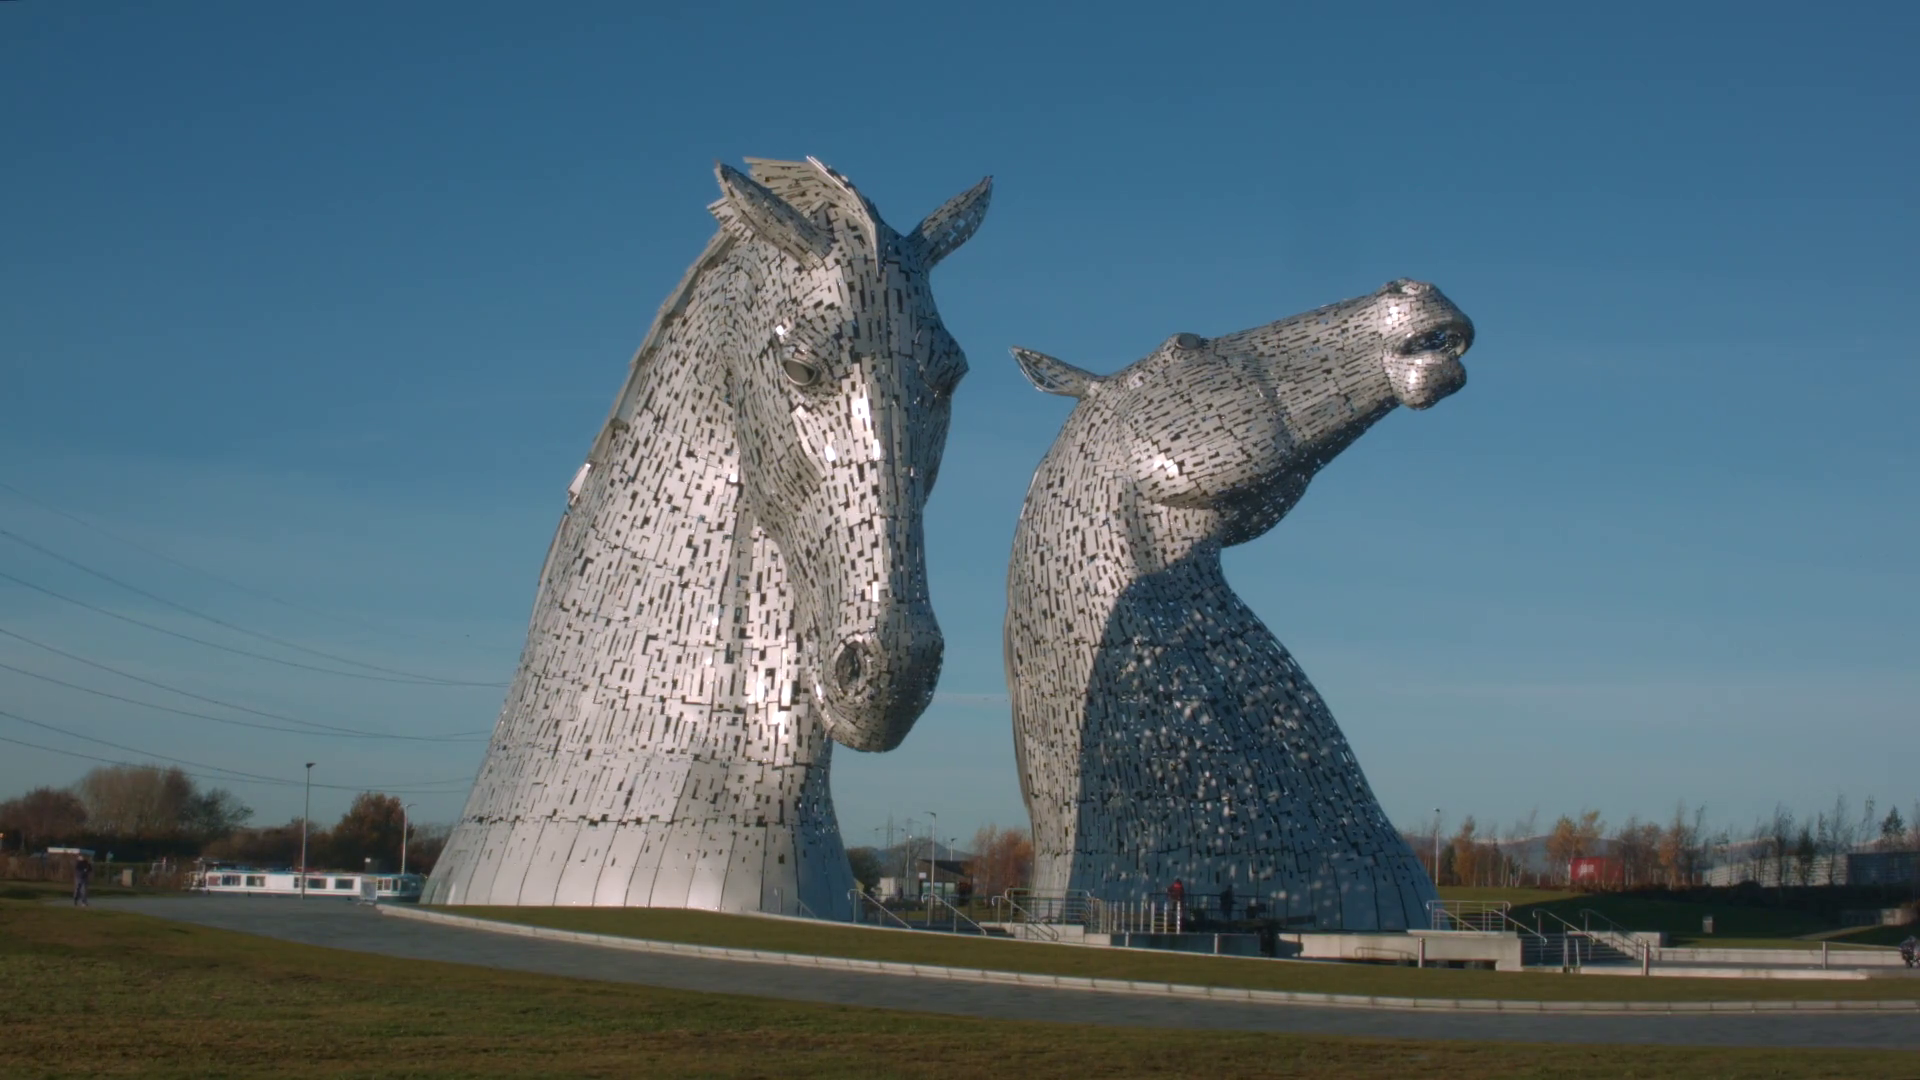 The Kelpies in Falkirk, Scotland are 30-metre-high horse-head ...